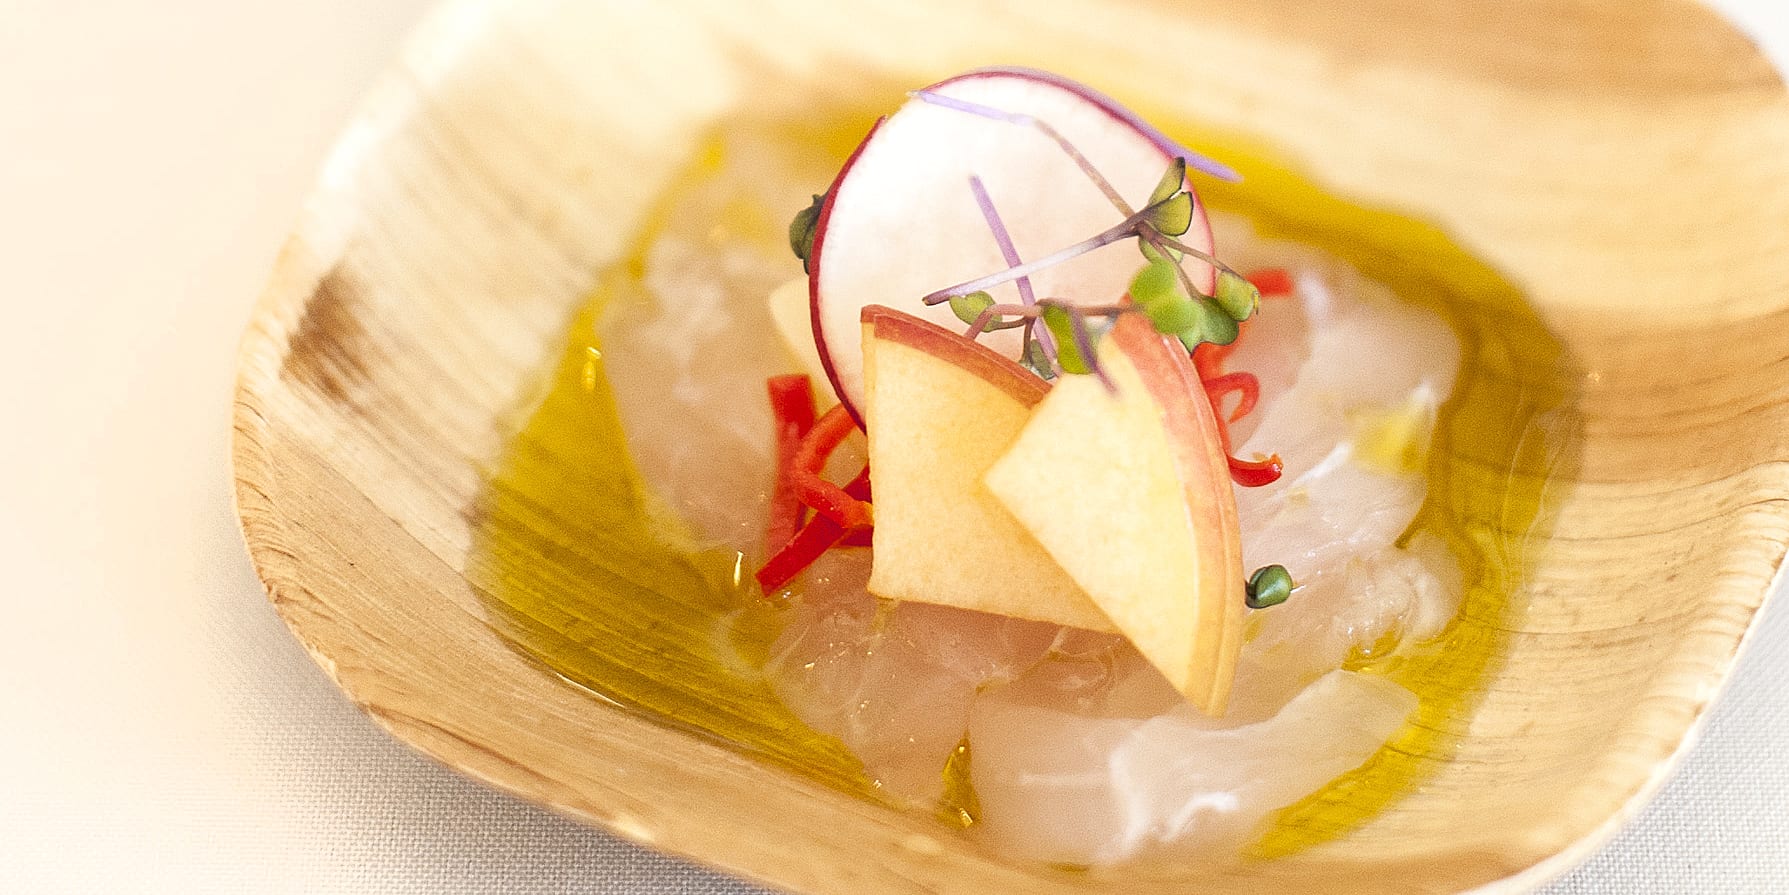 Crudo of Snapper from Chef Michael Kramer of The Lazy Goat in Greenville